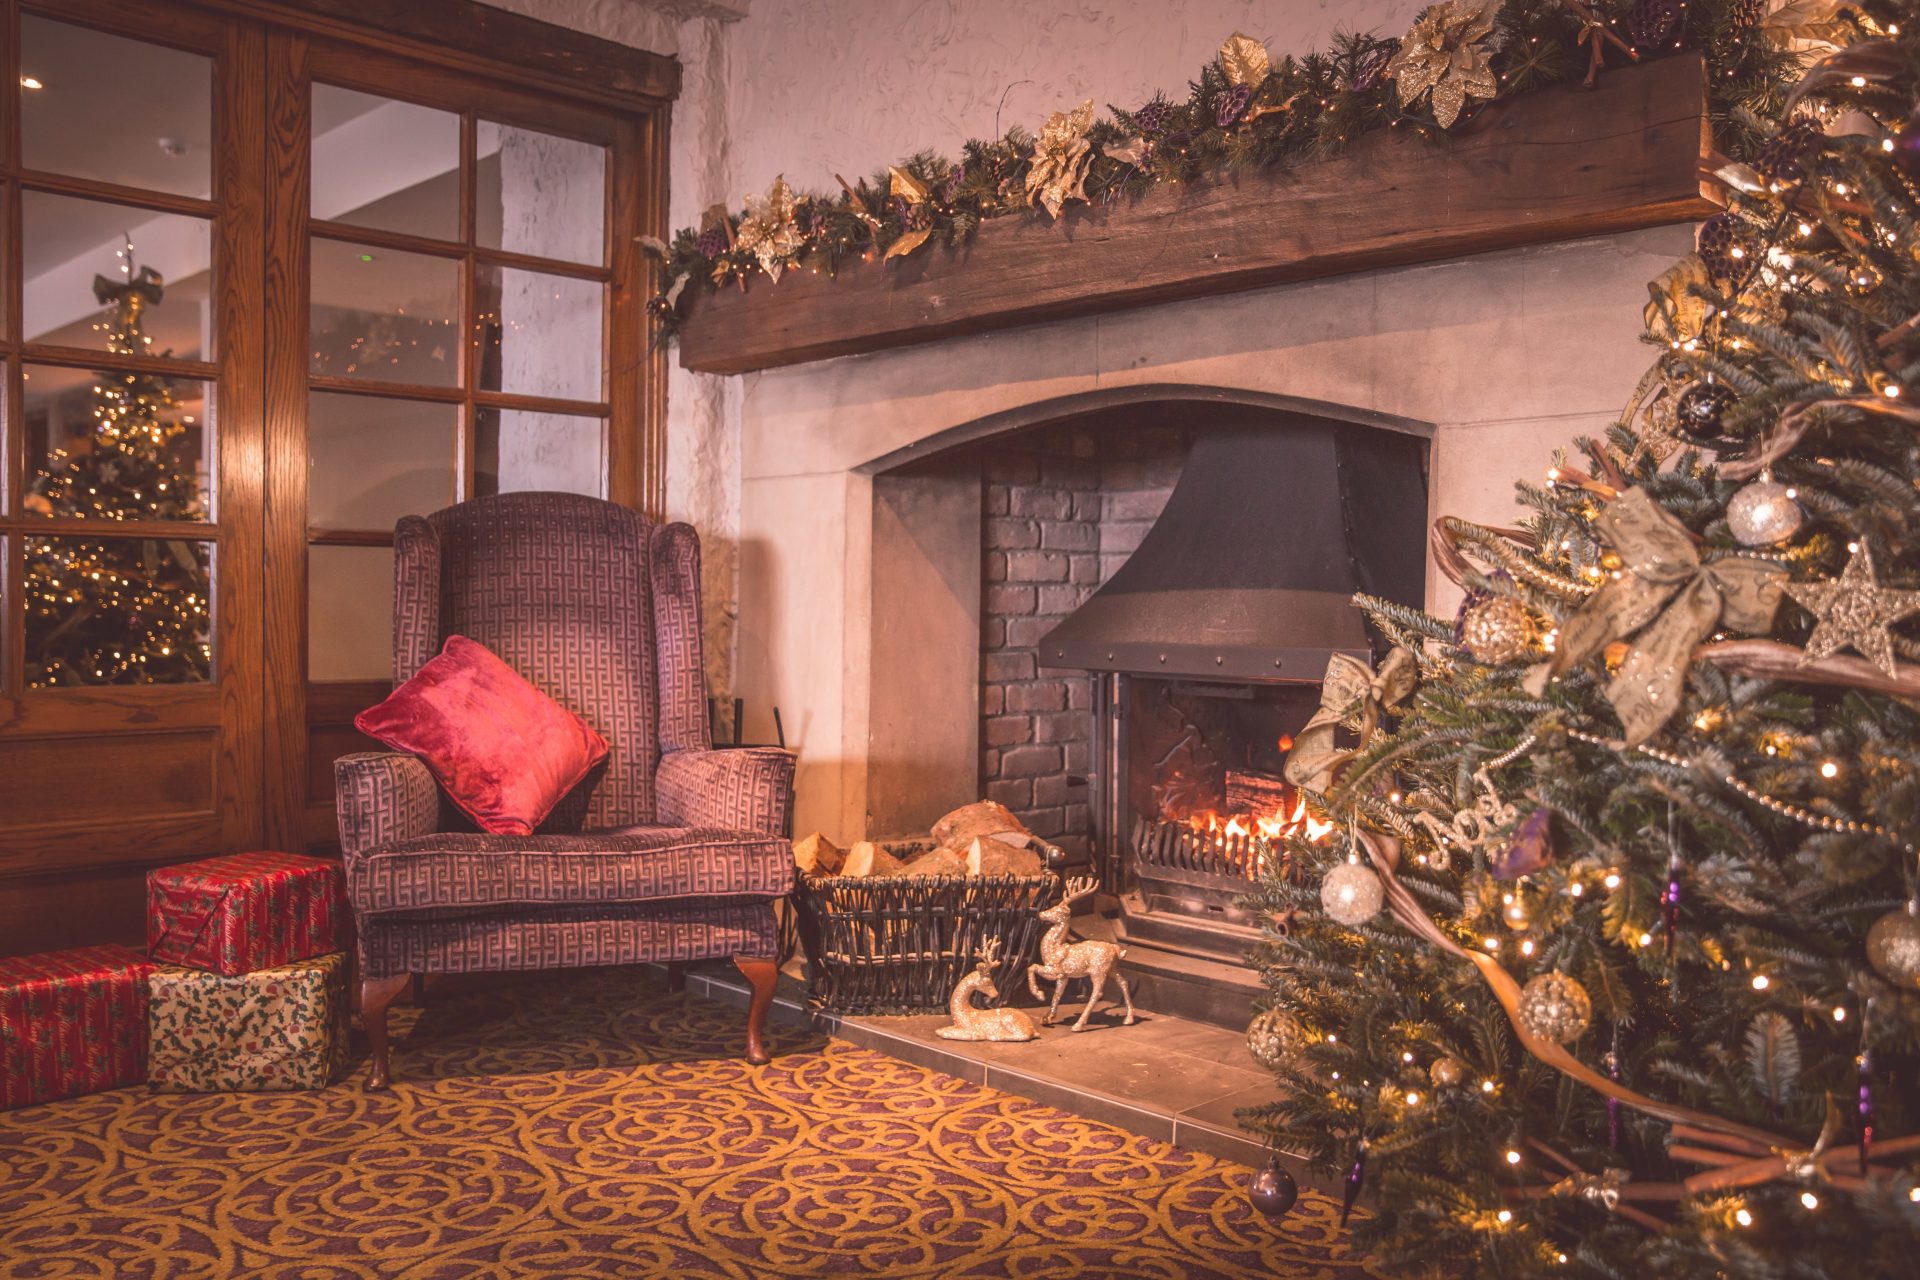 Scenic Christmas scene in front of fire place